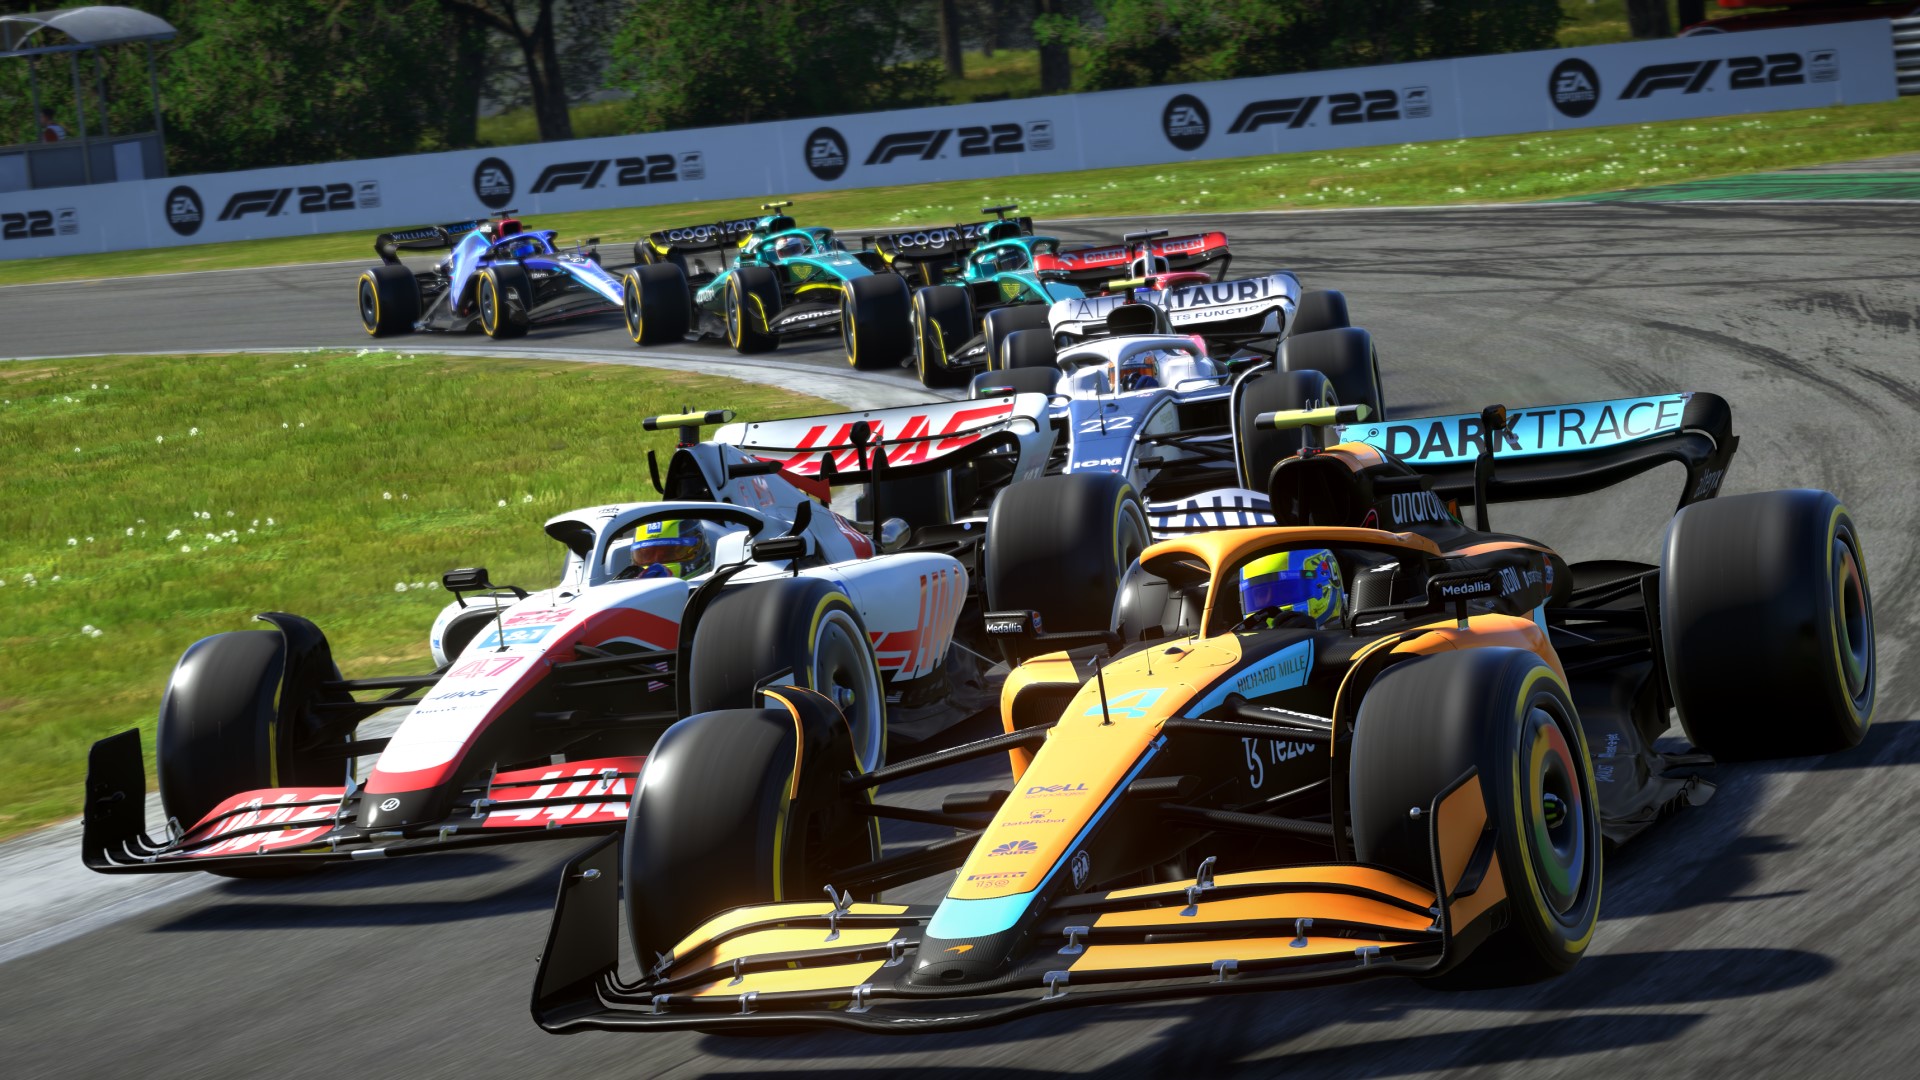 F1 22 Brings Players Together with Cross-Play